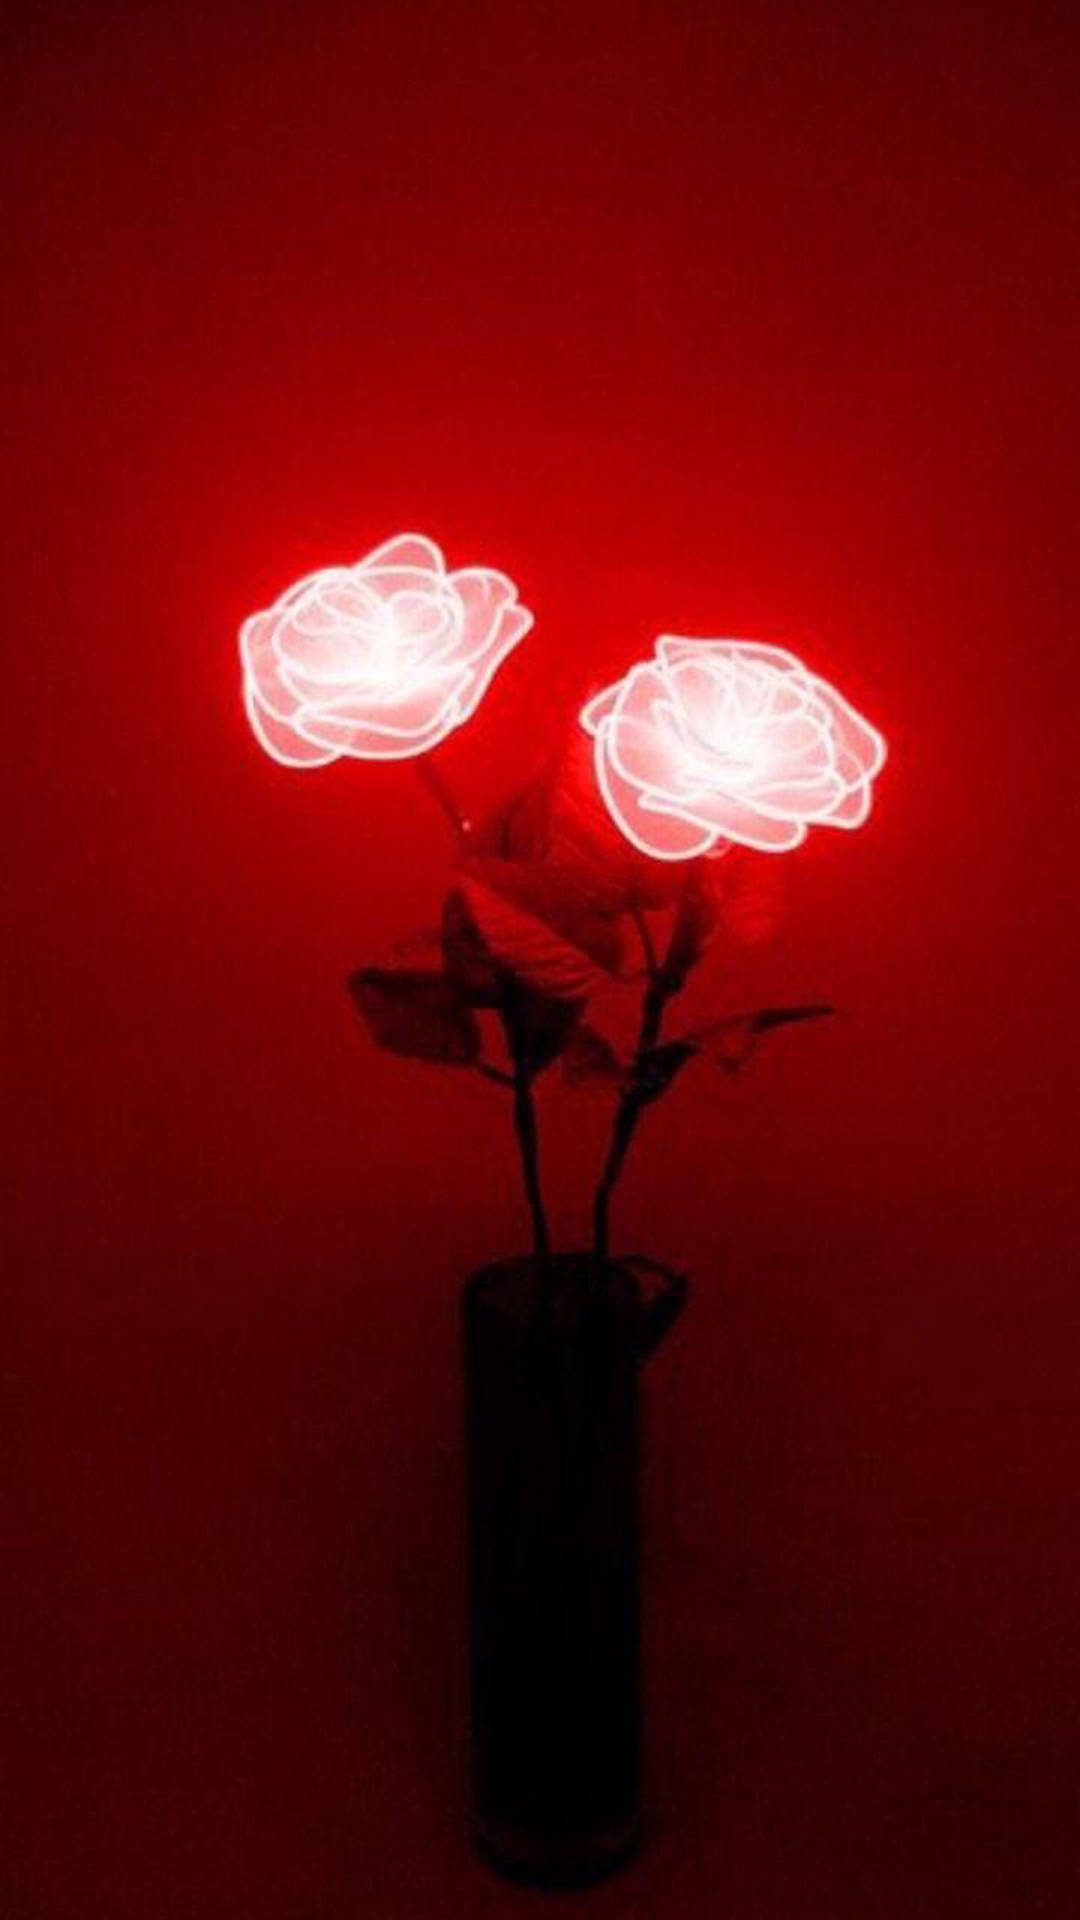 Red Glowing Flower Aesthetic Iphone Xr Wallpaper